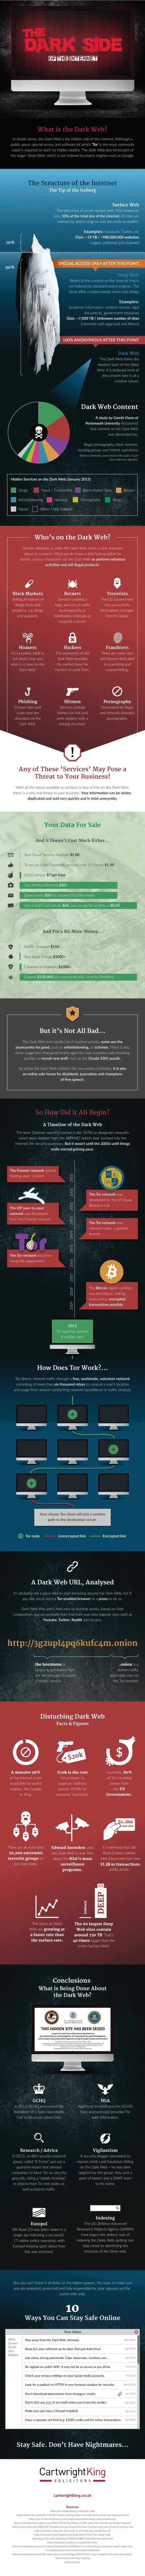 The Dark Side of the Internet [Infographic]